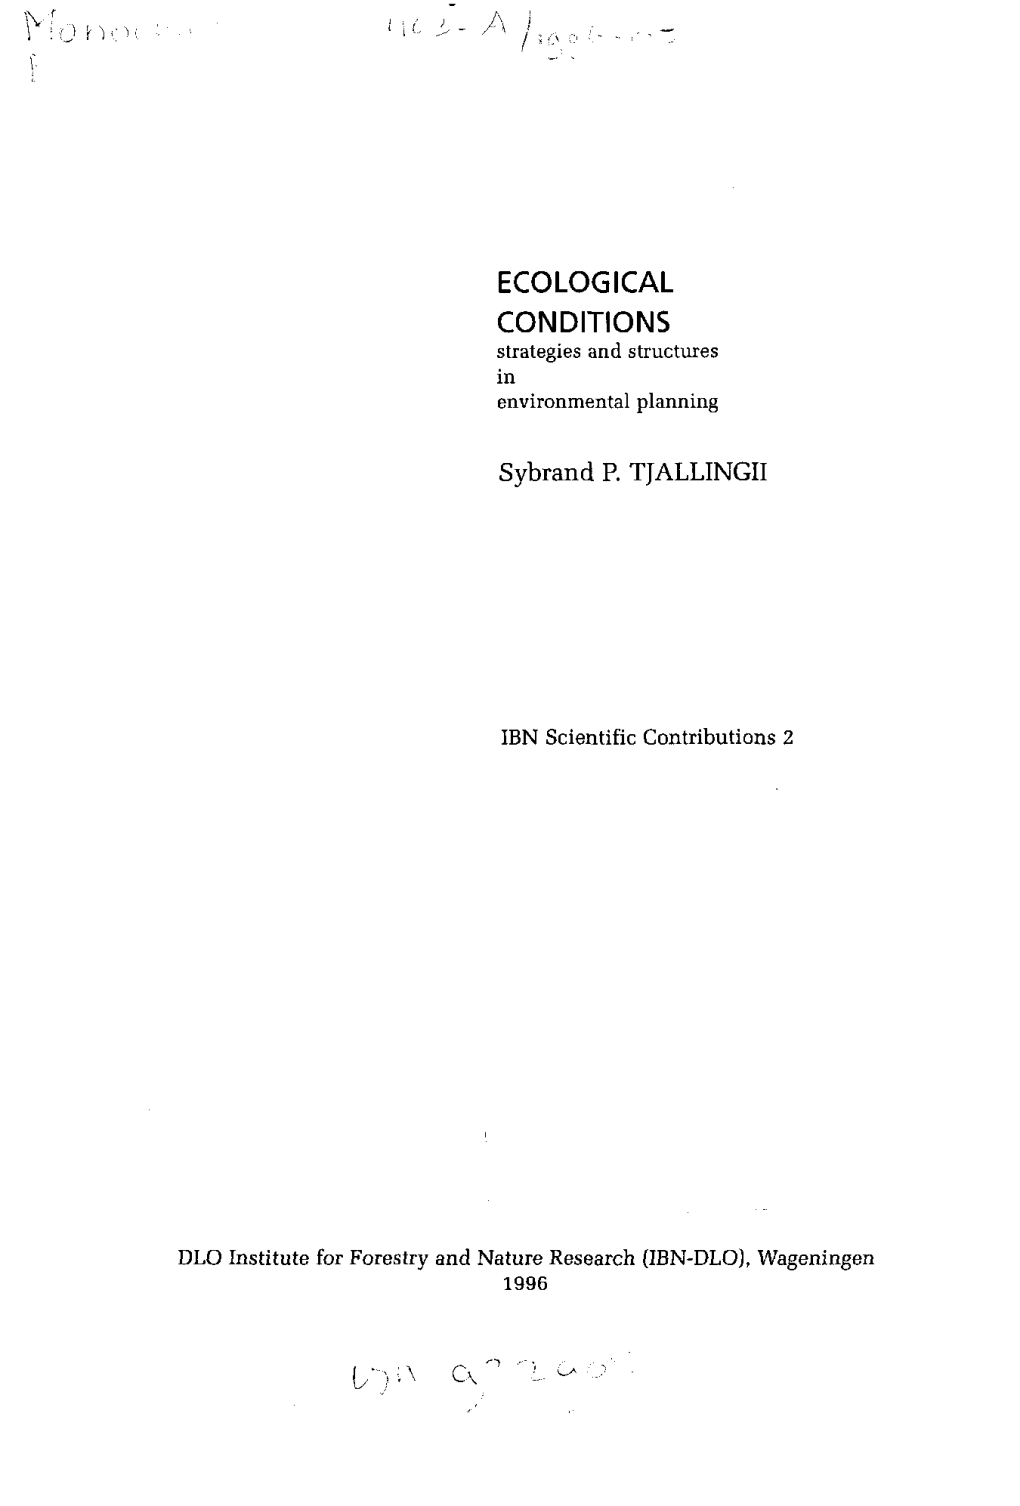 ECOLOGICAL CONDITIONS Strategies and Structures in Environmental Planning